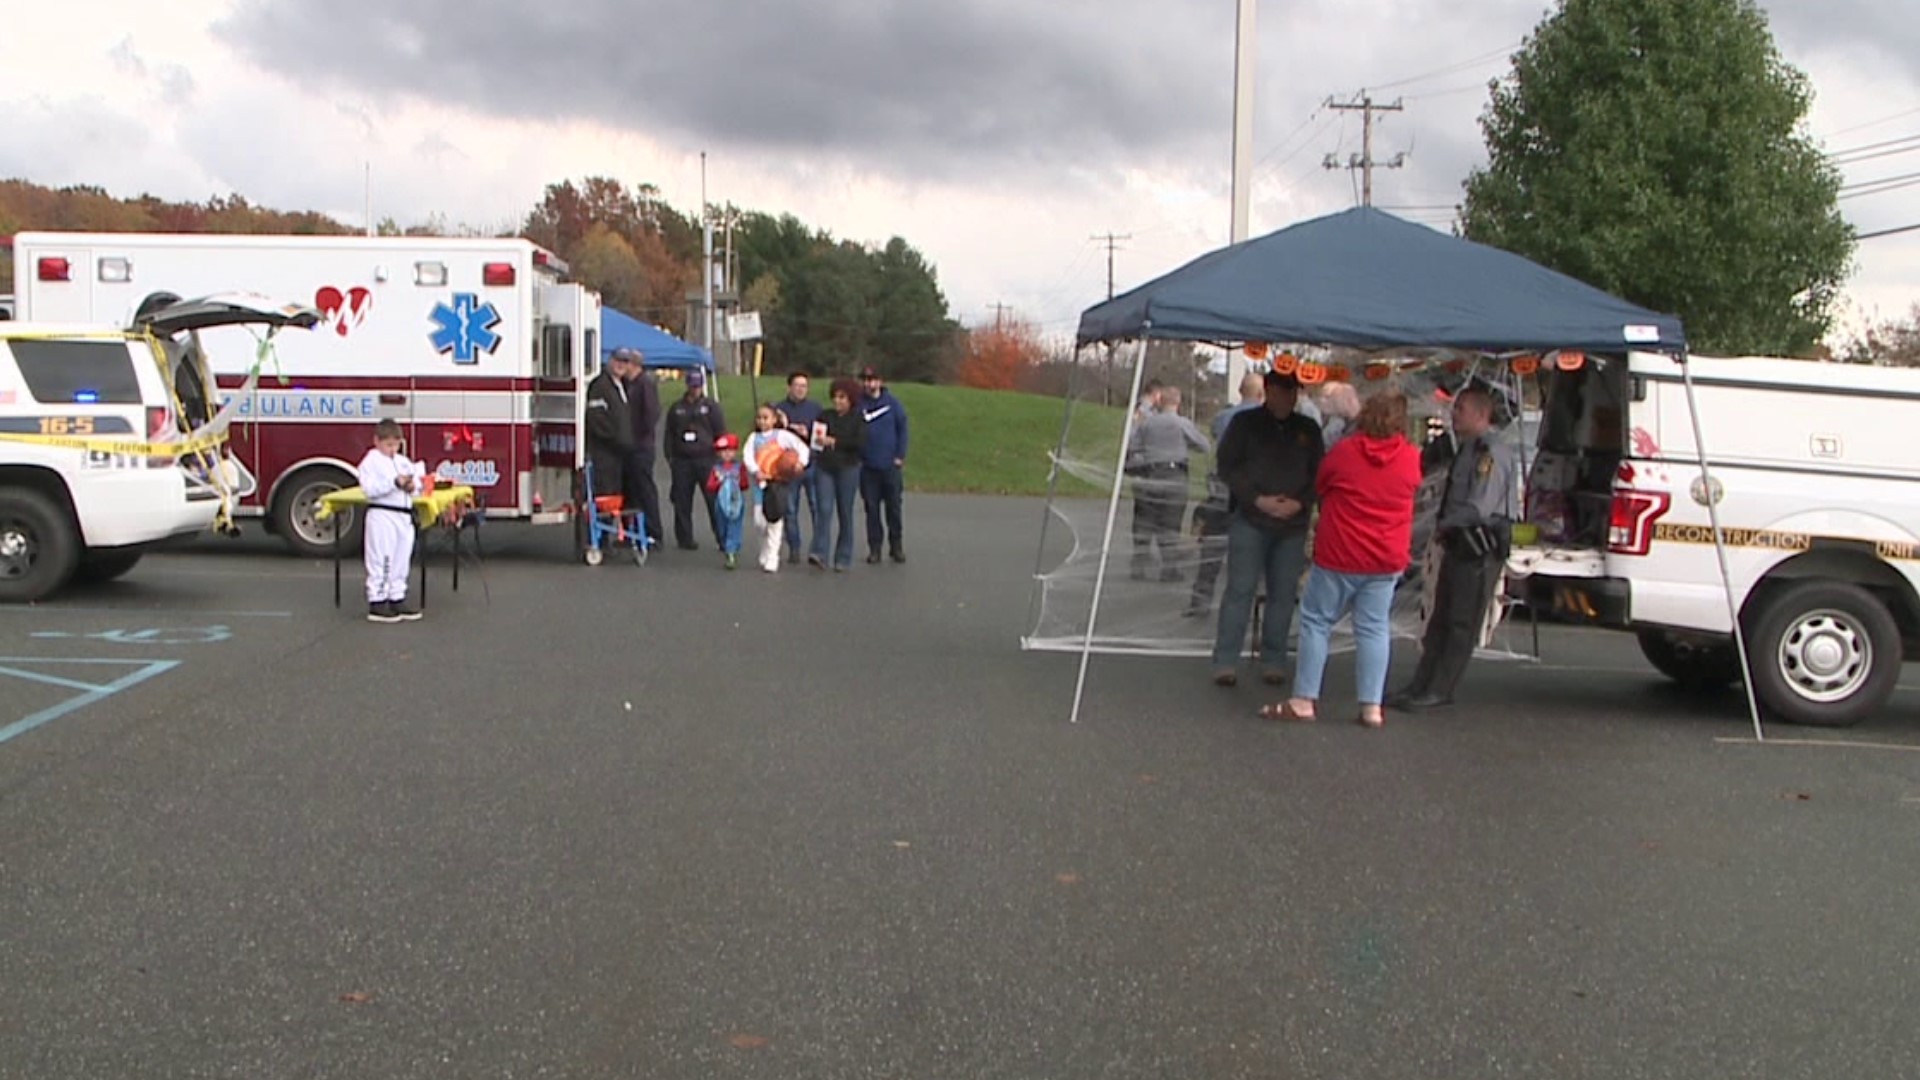 State Police in Hazleton and other first responders hosted a free trunk-or-treat event at the barracks in West Hazleton.